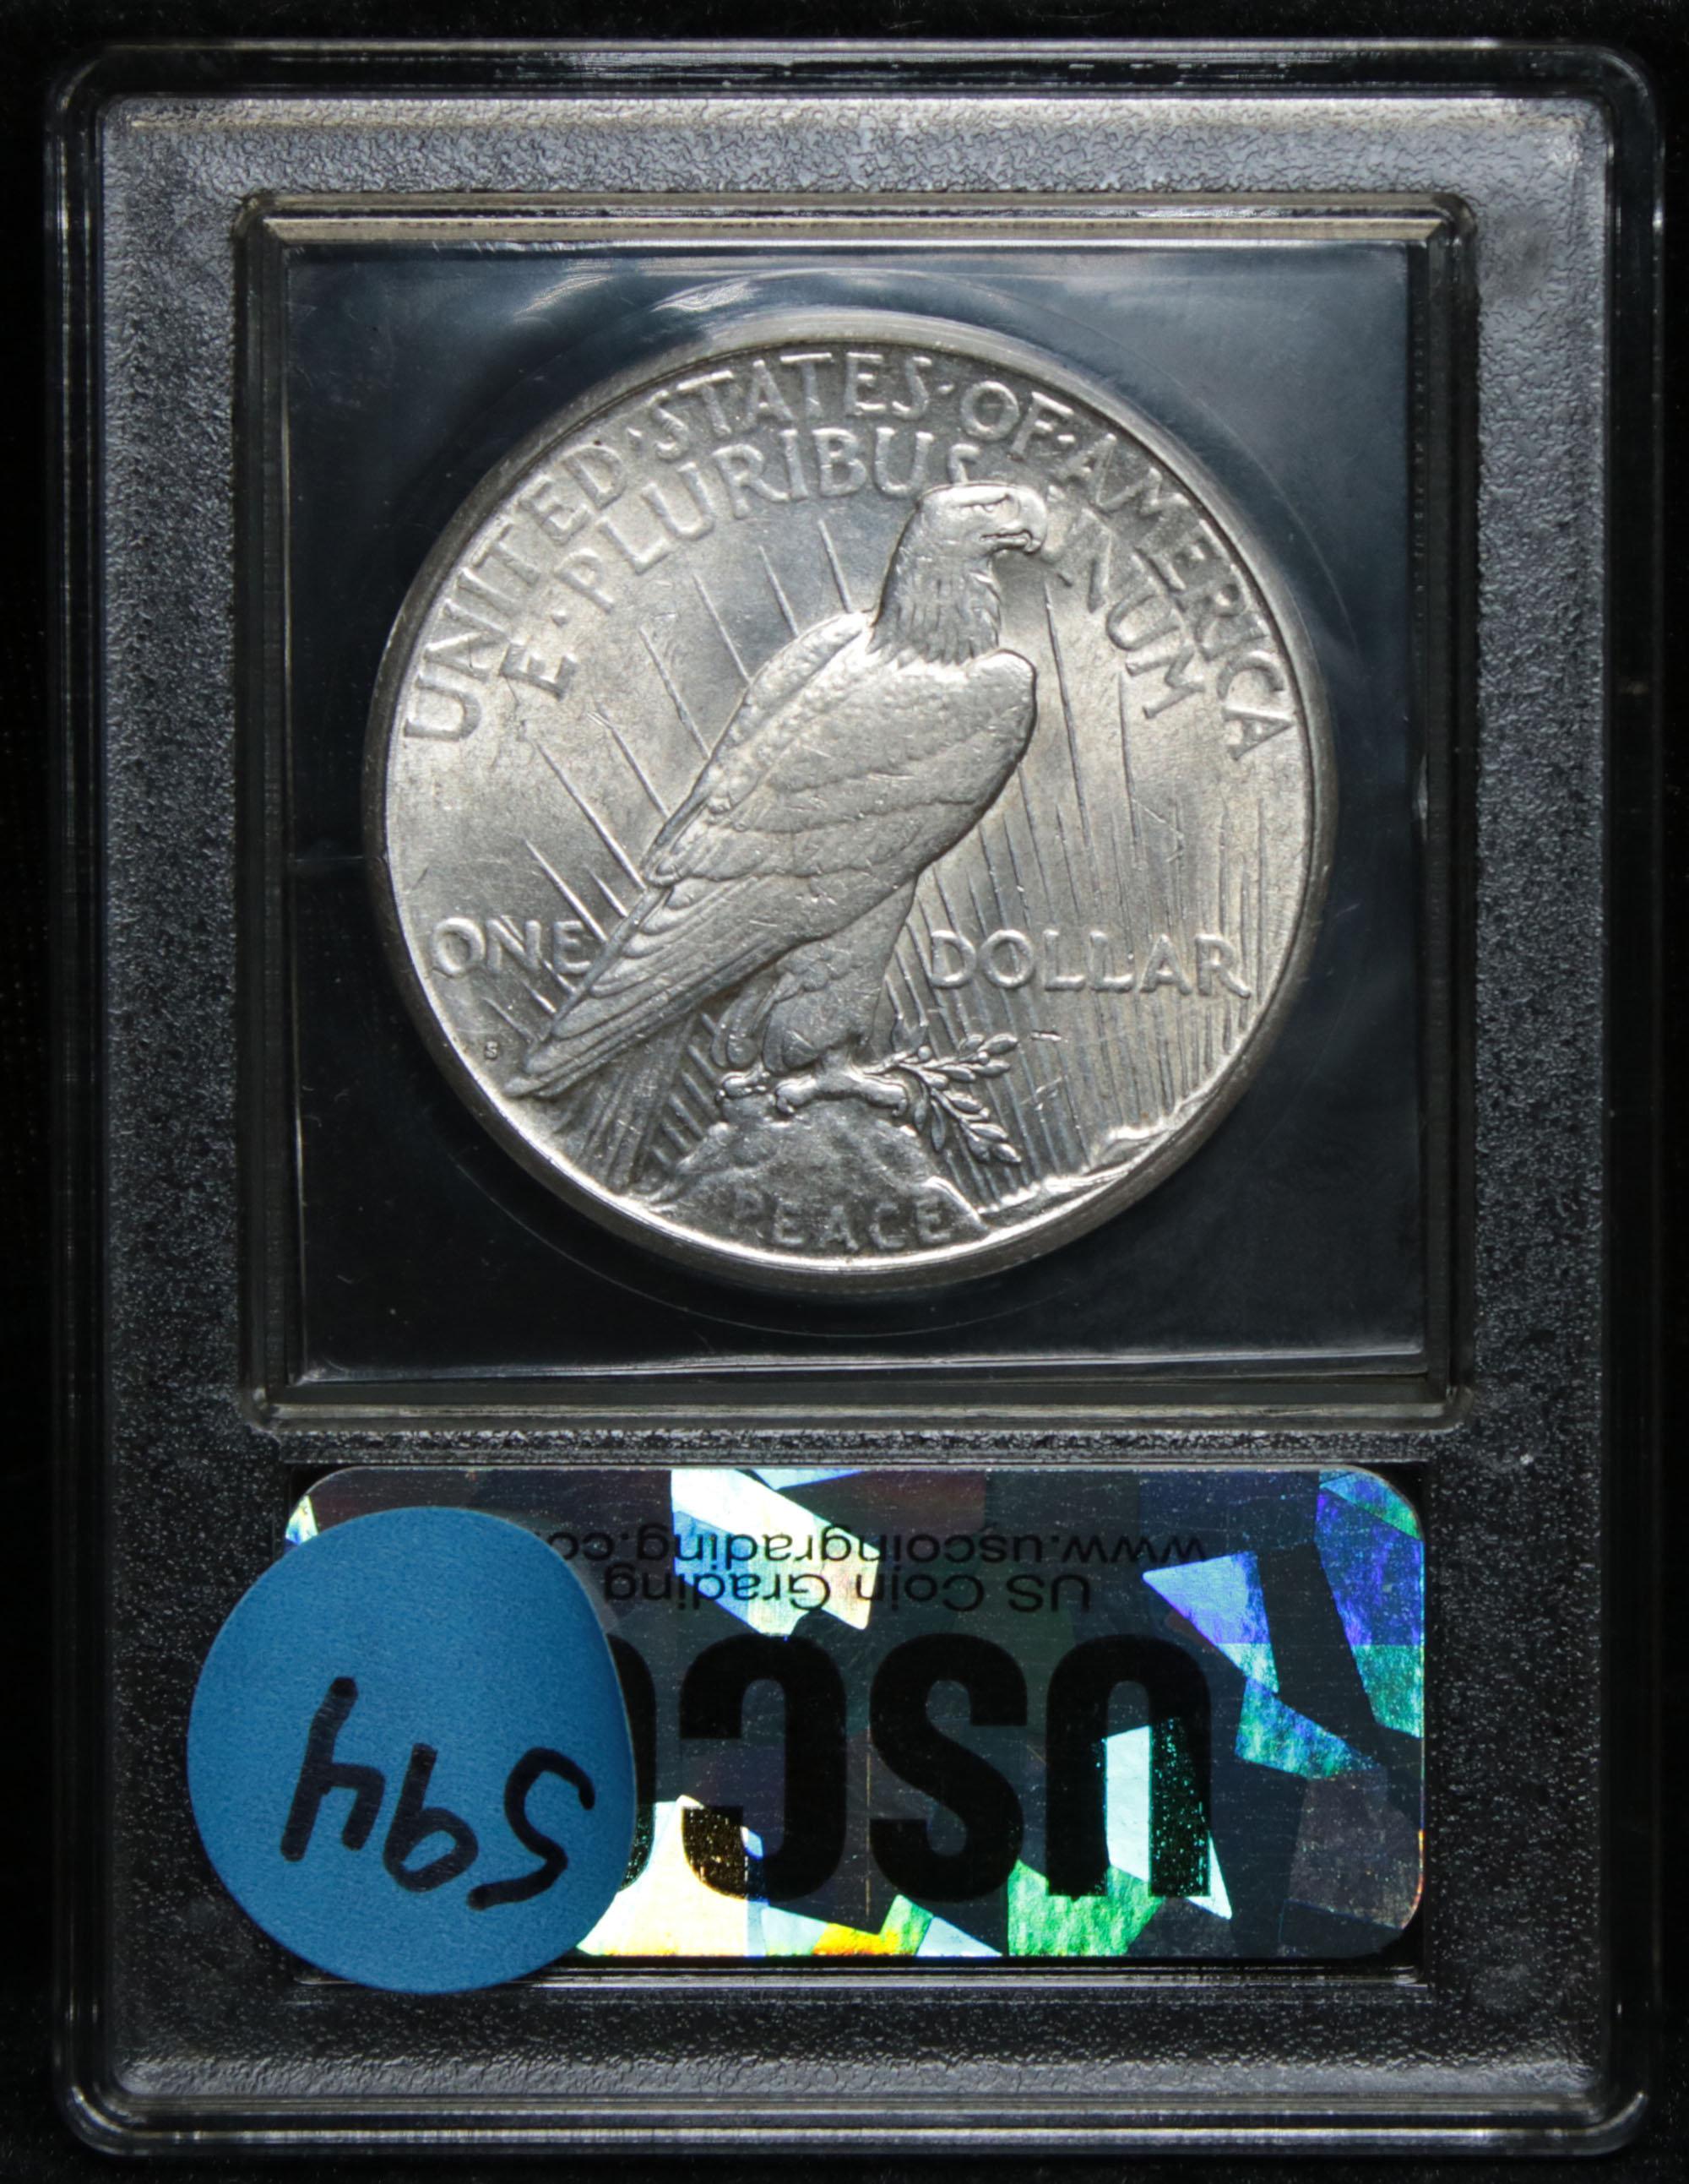 ***Auction Highlight*** 1924-s Peace Dollar $1 Graded Select+ Unc by USCG (fc)